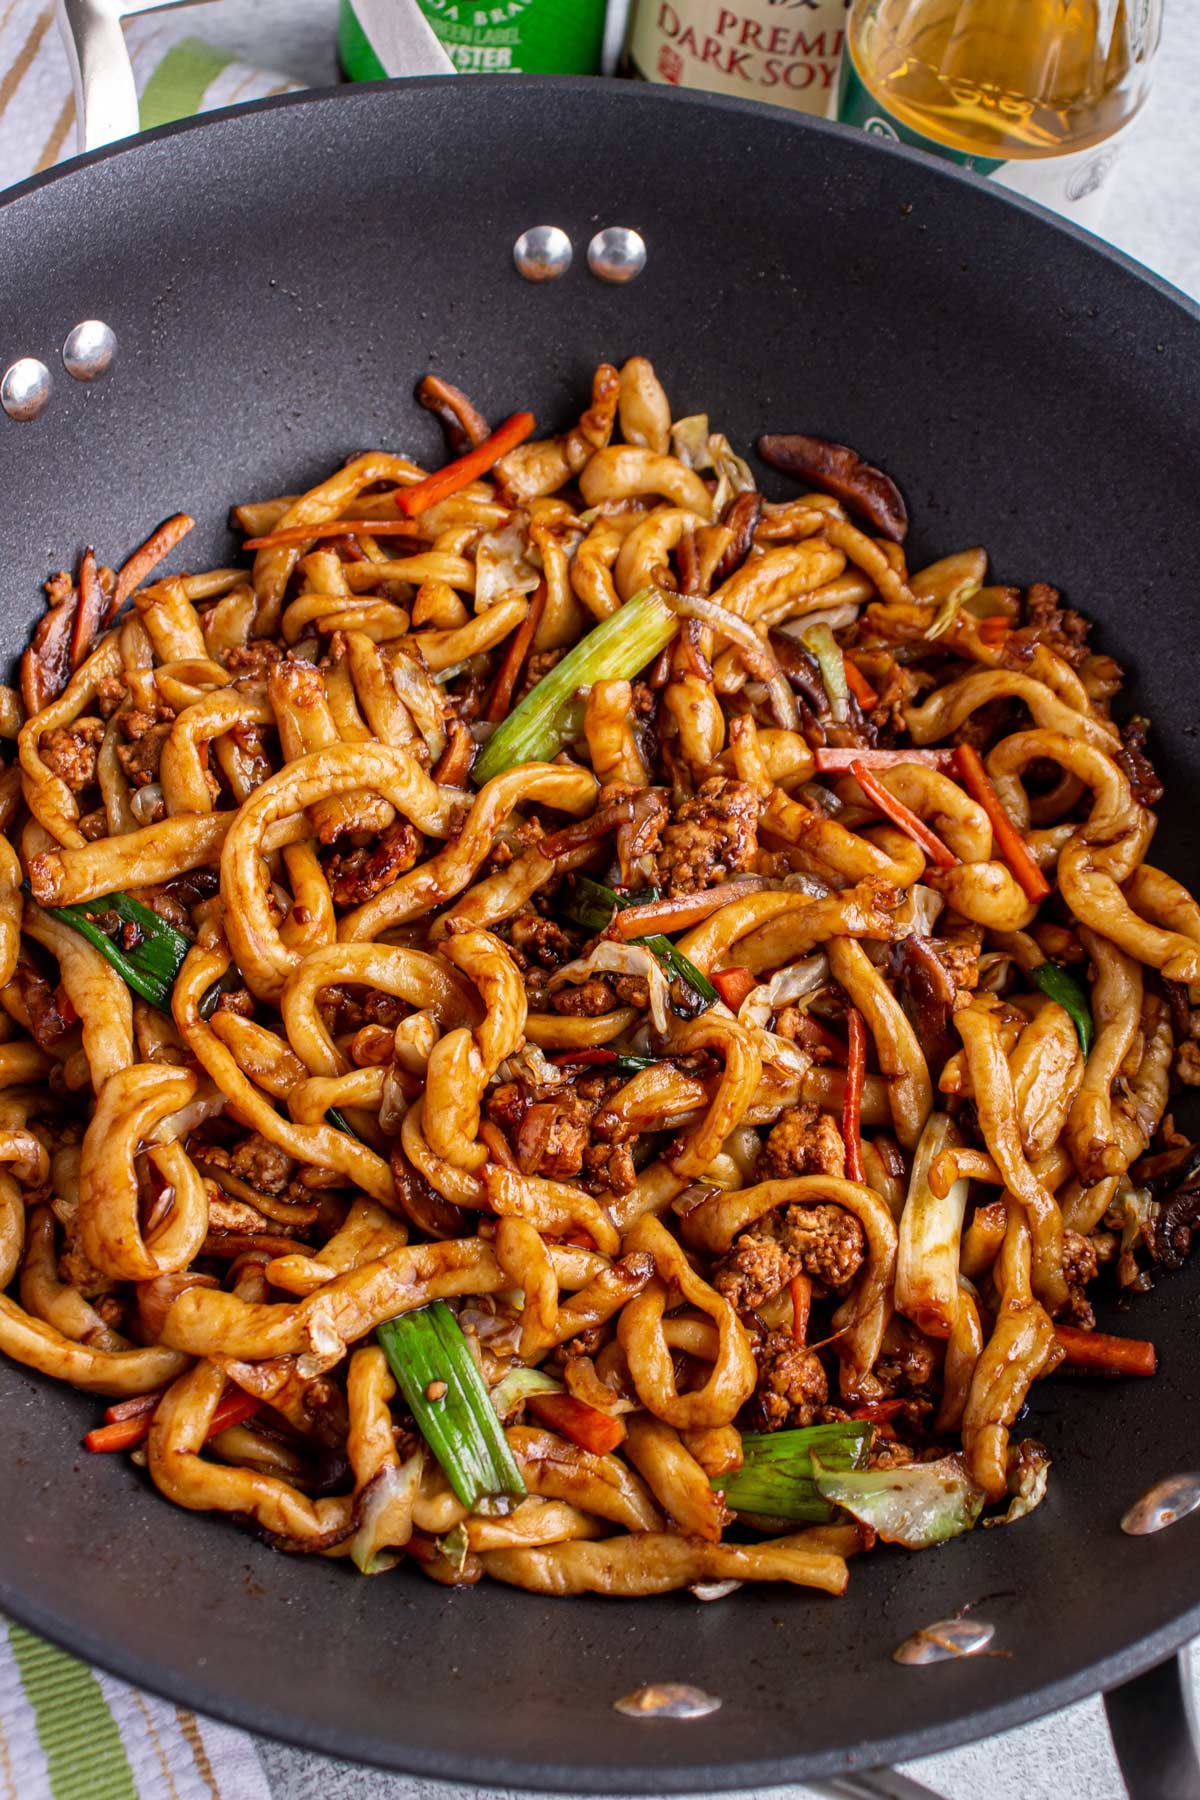 Stir-fried yaki udon noodles with scallions, carrots, cabbage, and ground pork in a wok.